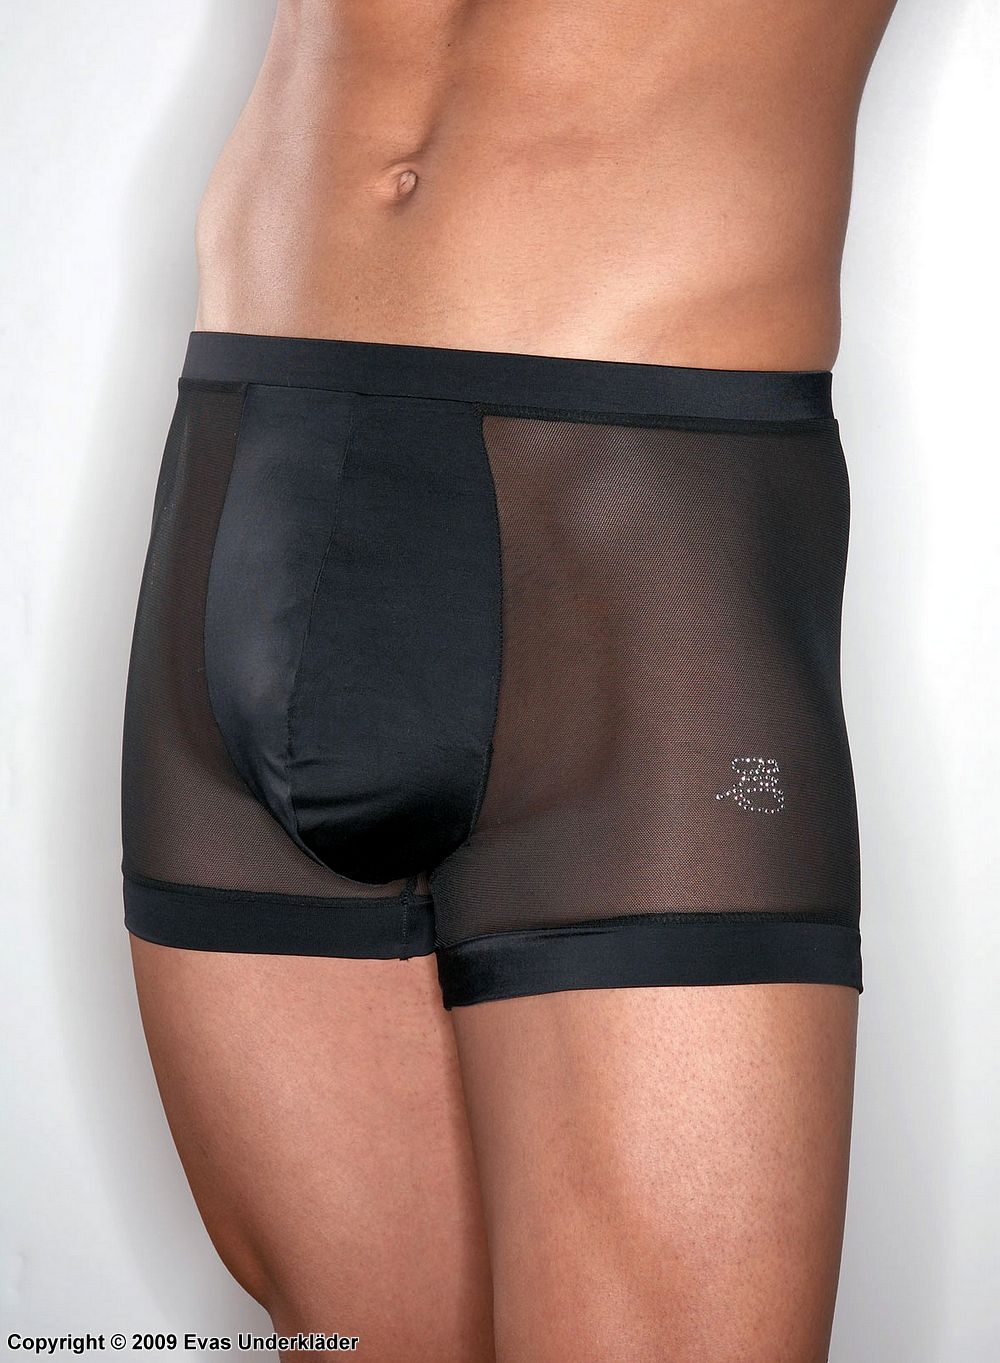 Fitted boxer shorts in sheer mesh